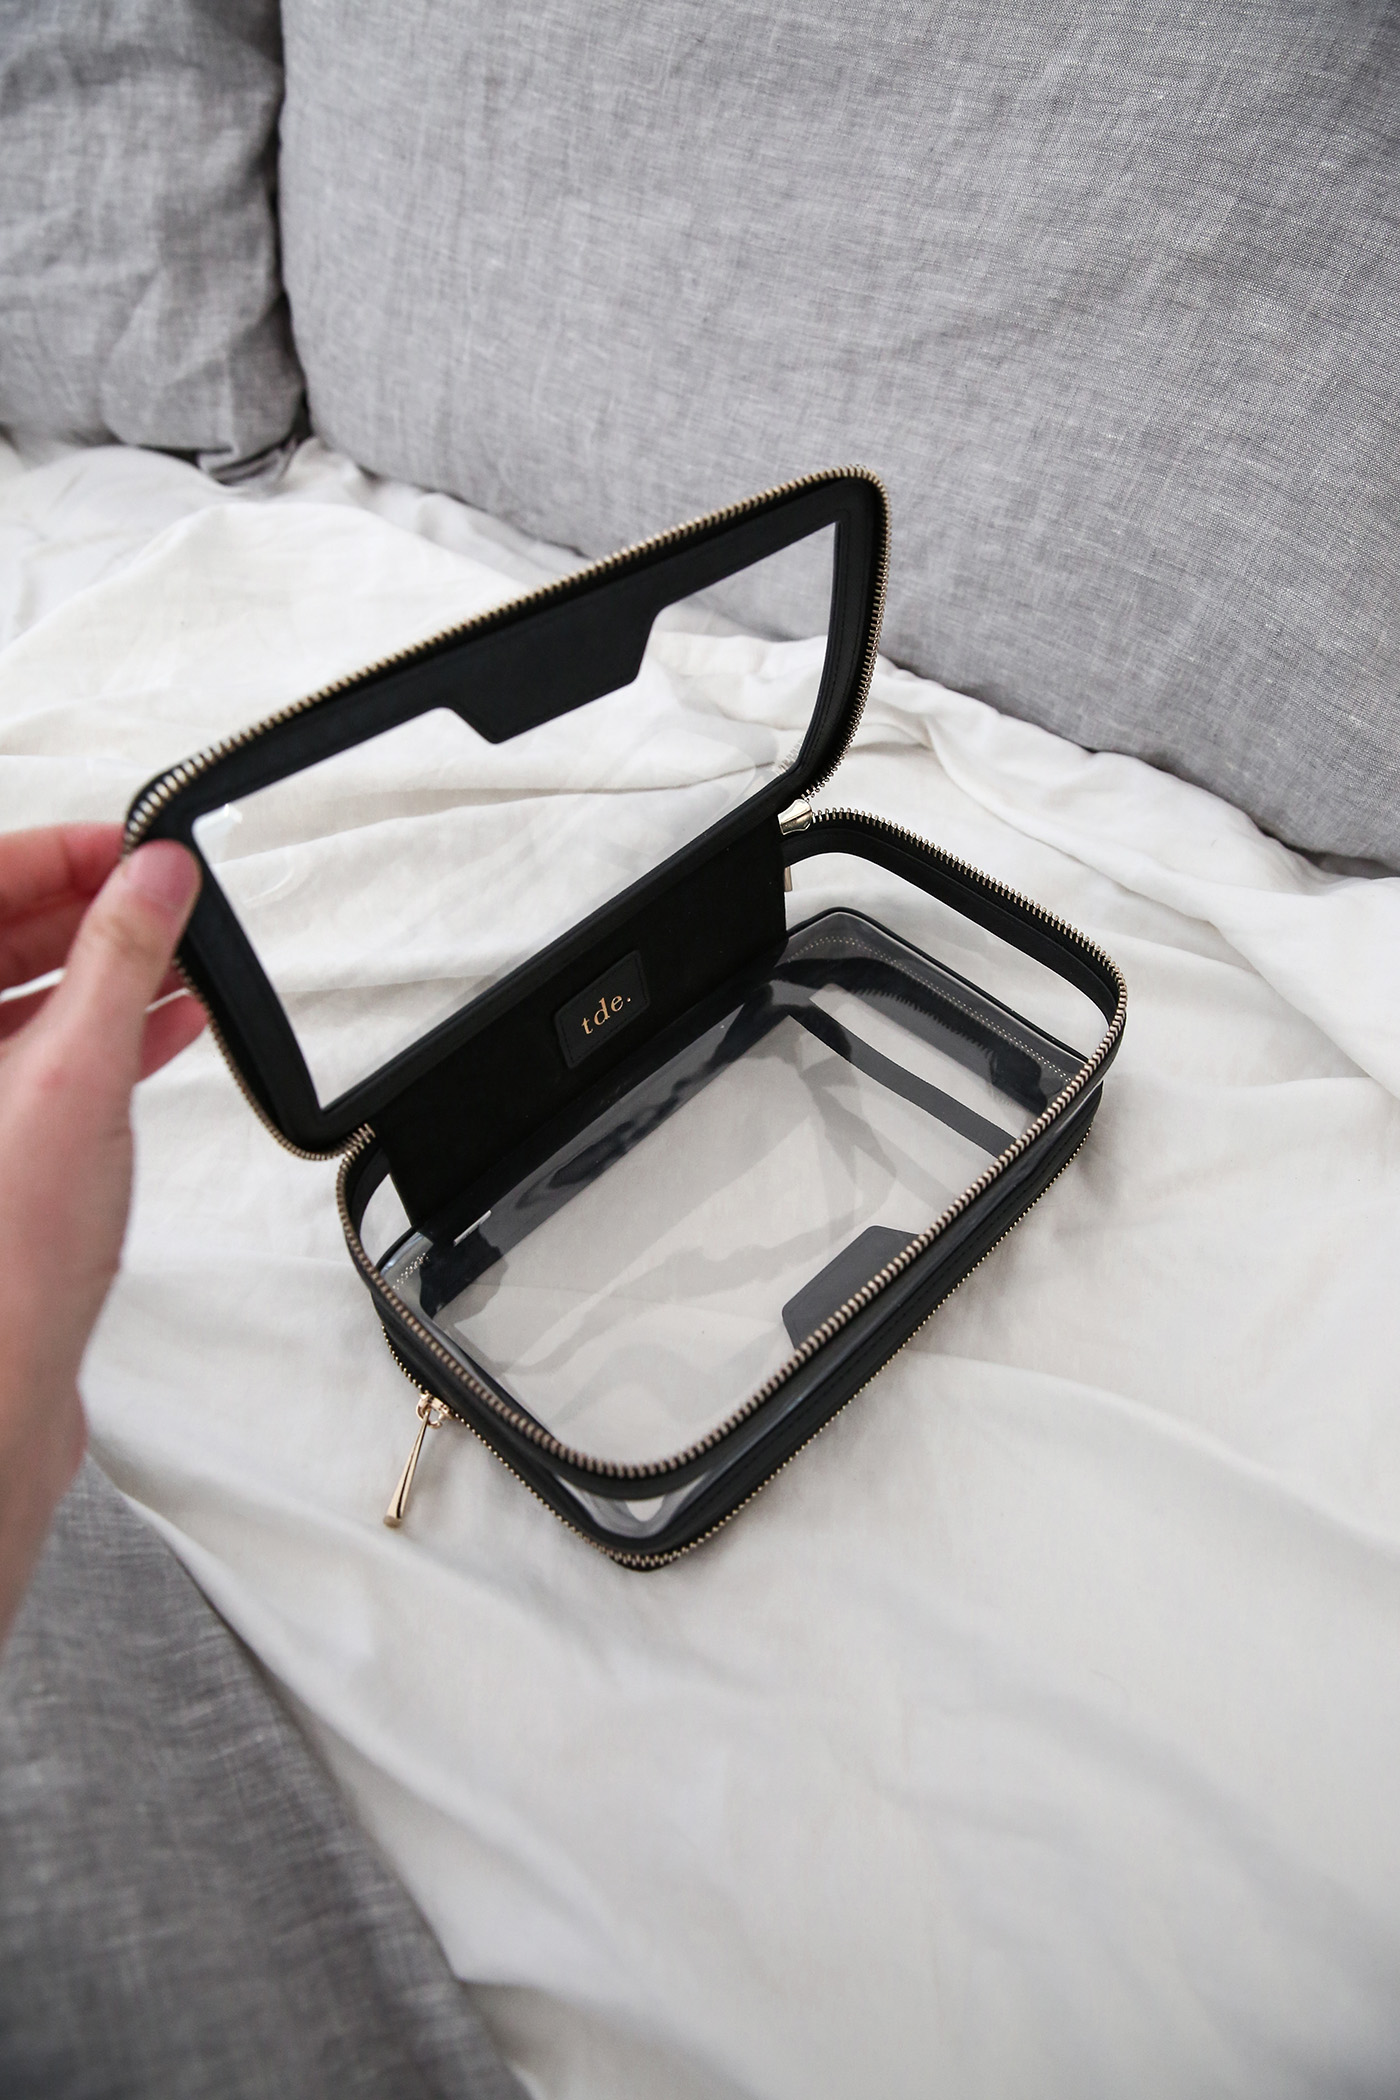 The Daily Edited Transparent Cosmetic Case vs. Anya Hindmarch